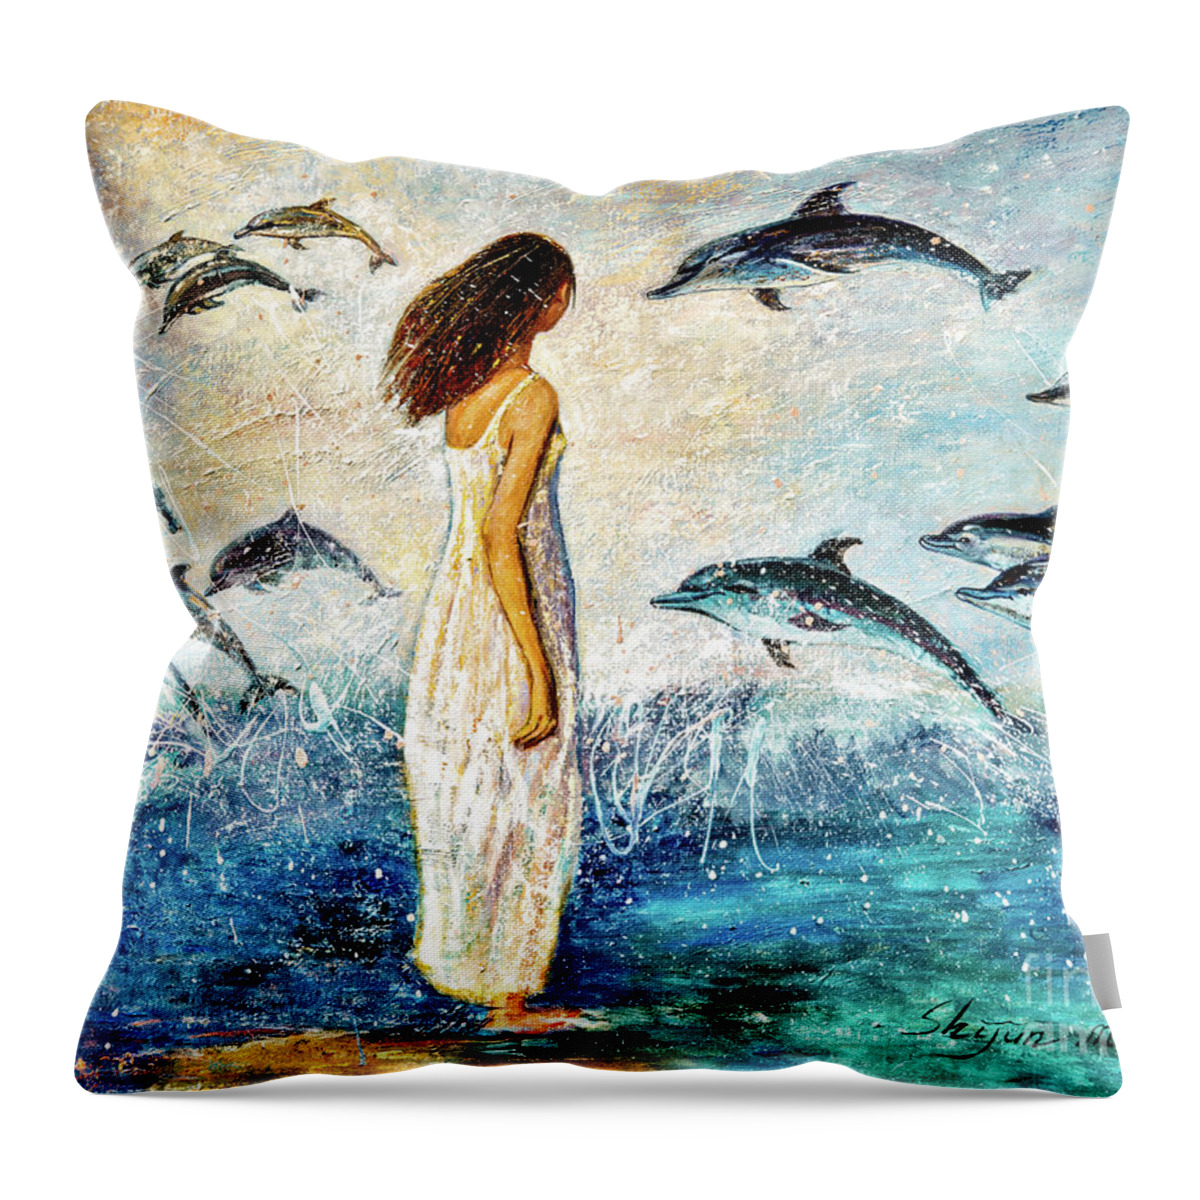 Dolphin Throw Pillow featuring the painting Dolphin Bay by Shijun Munns